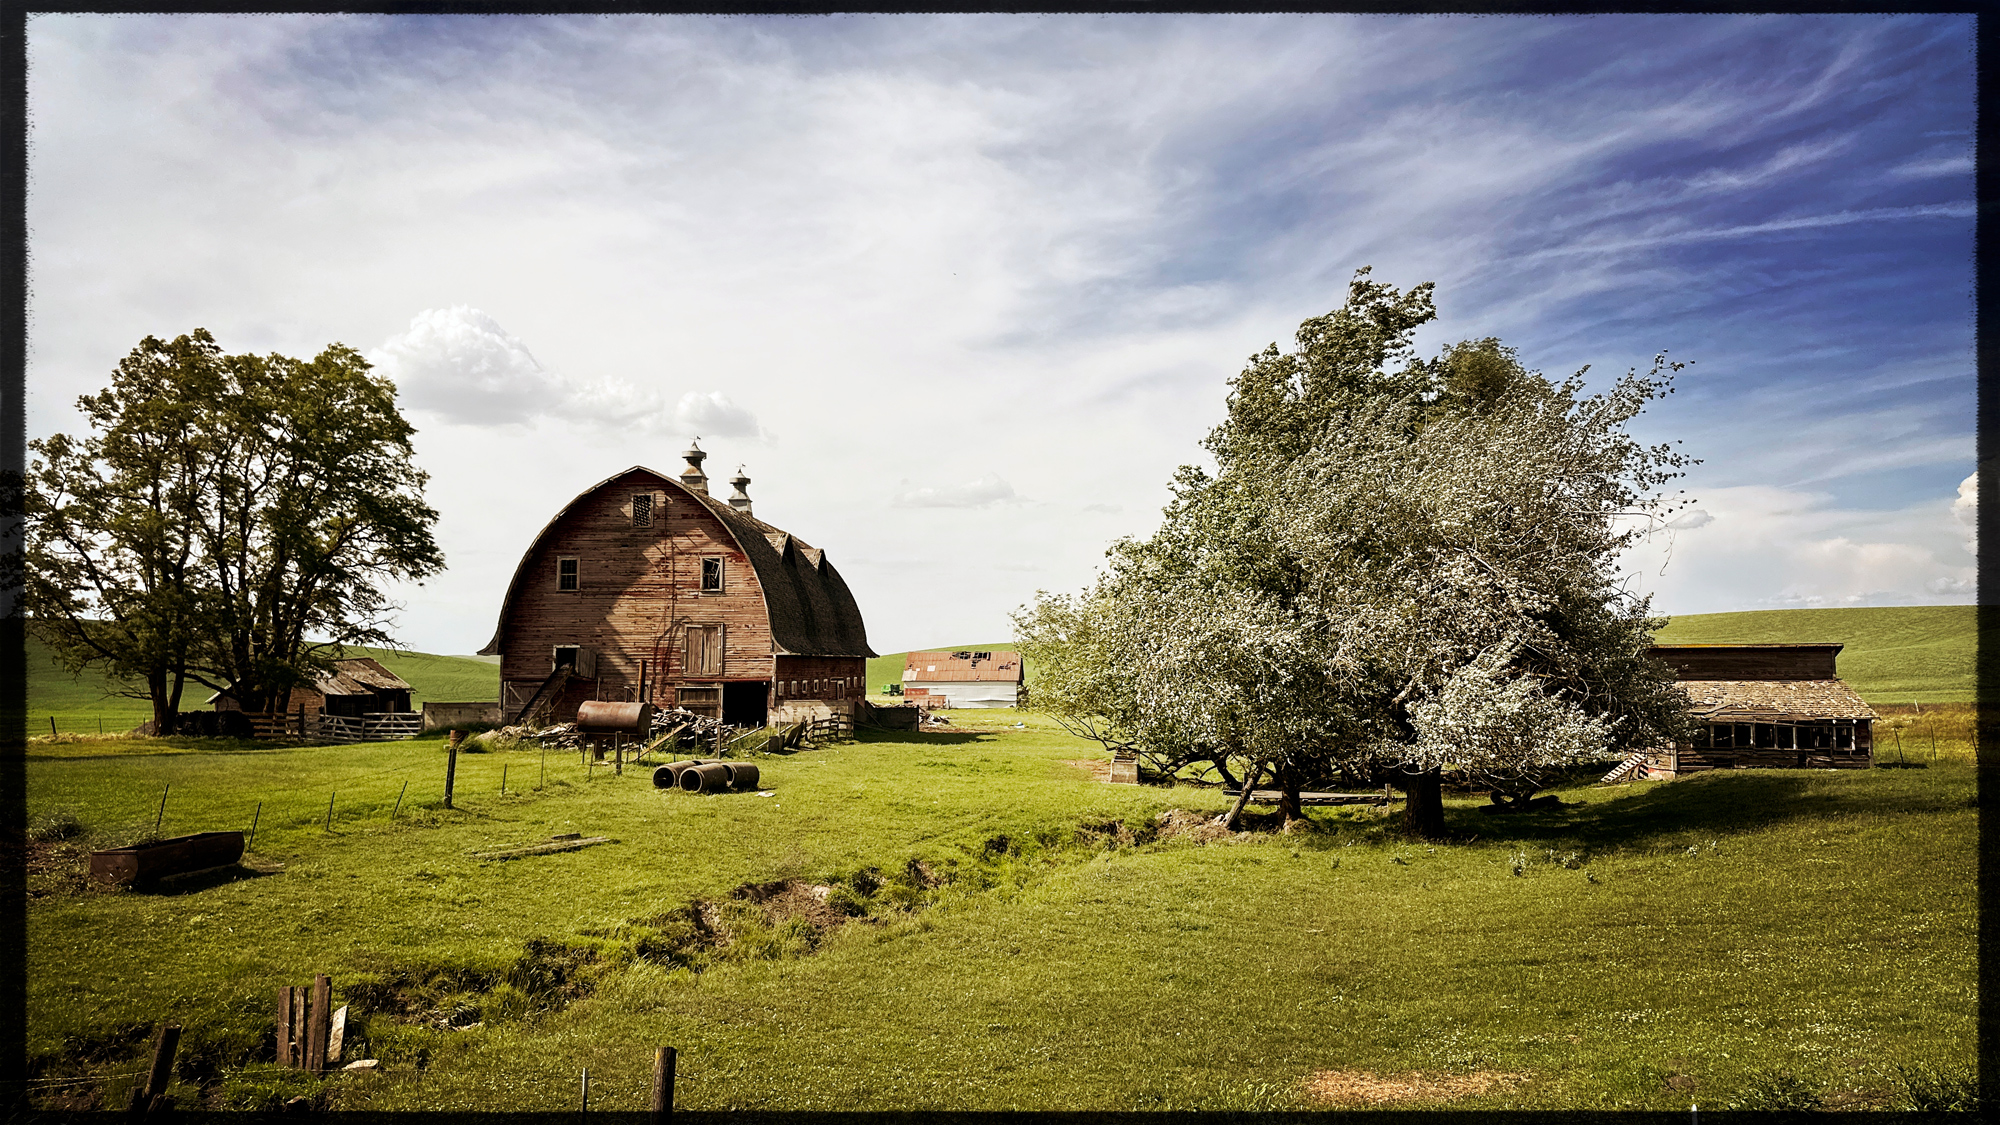 Such a beautiful barn and property that is slowly decaying. Must have been something in the day.